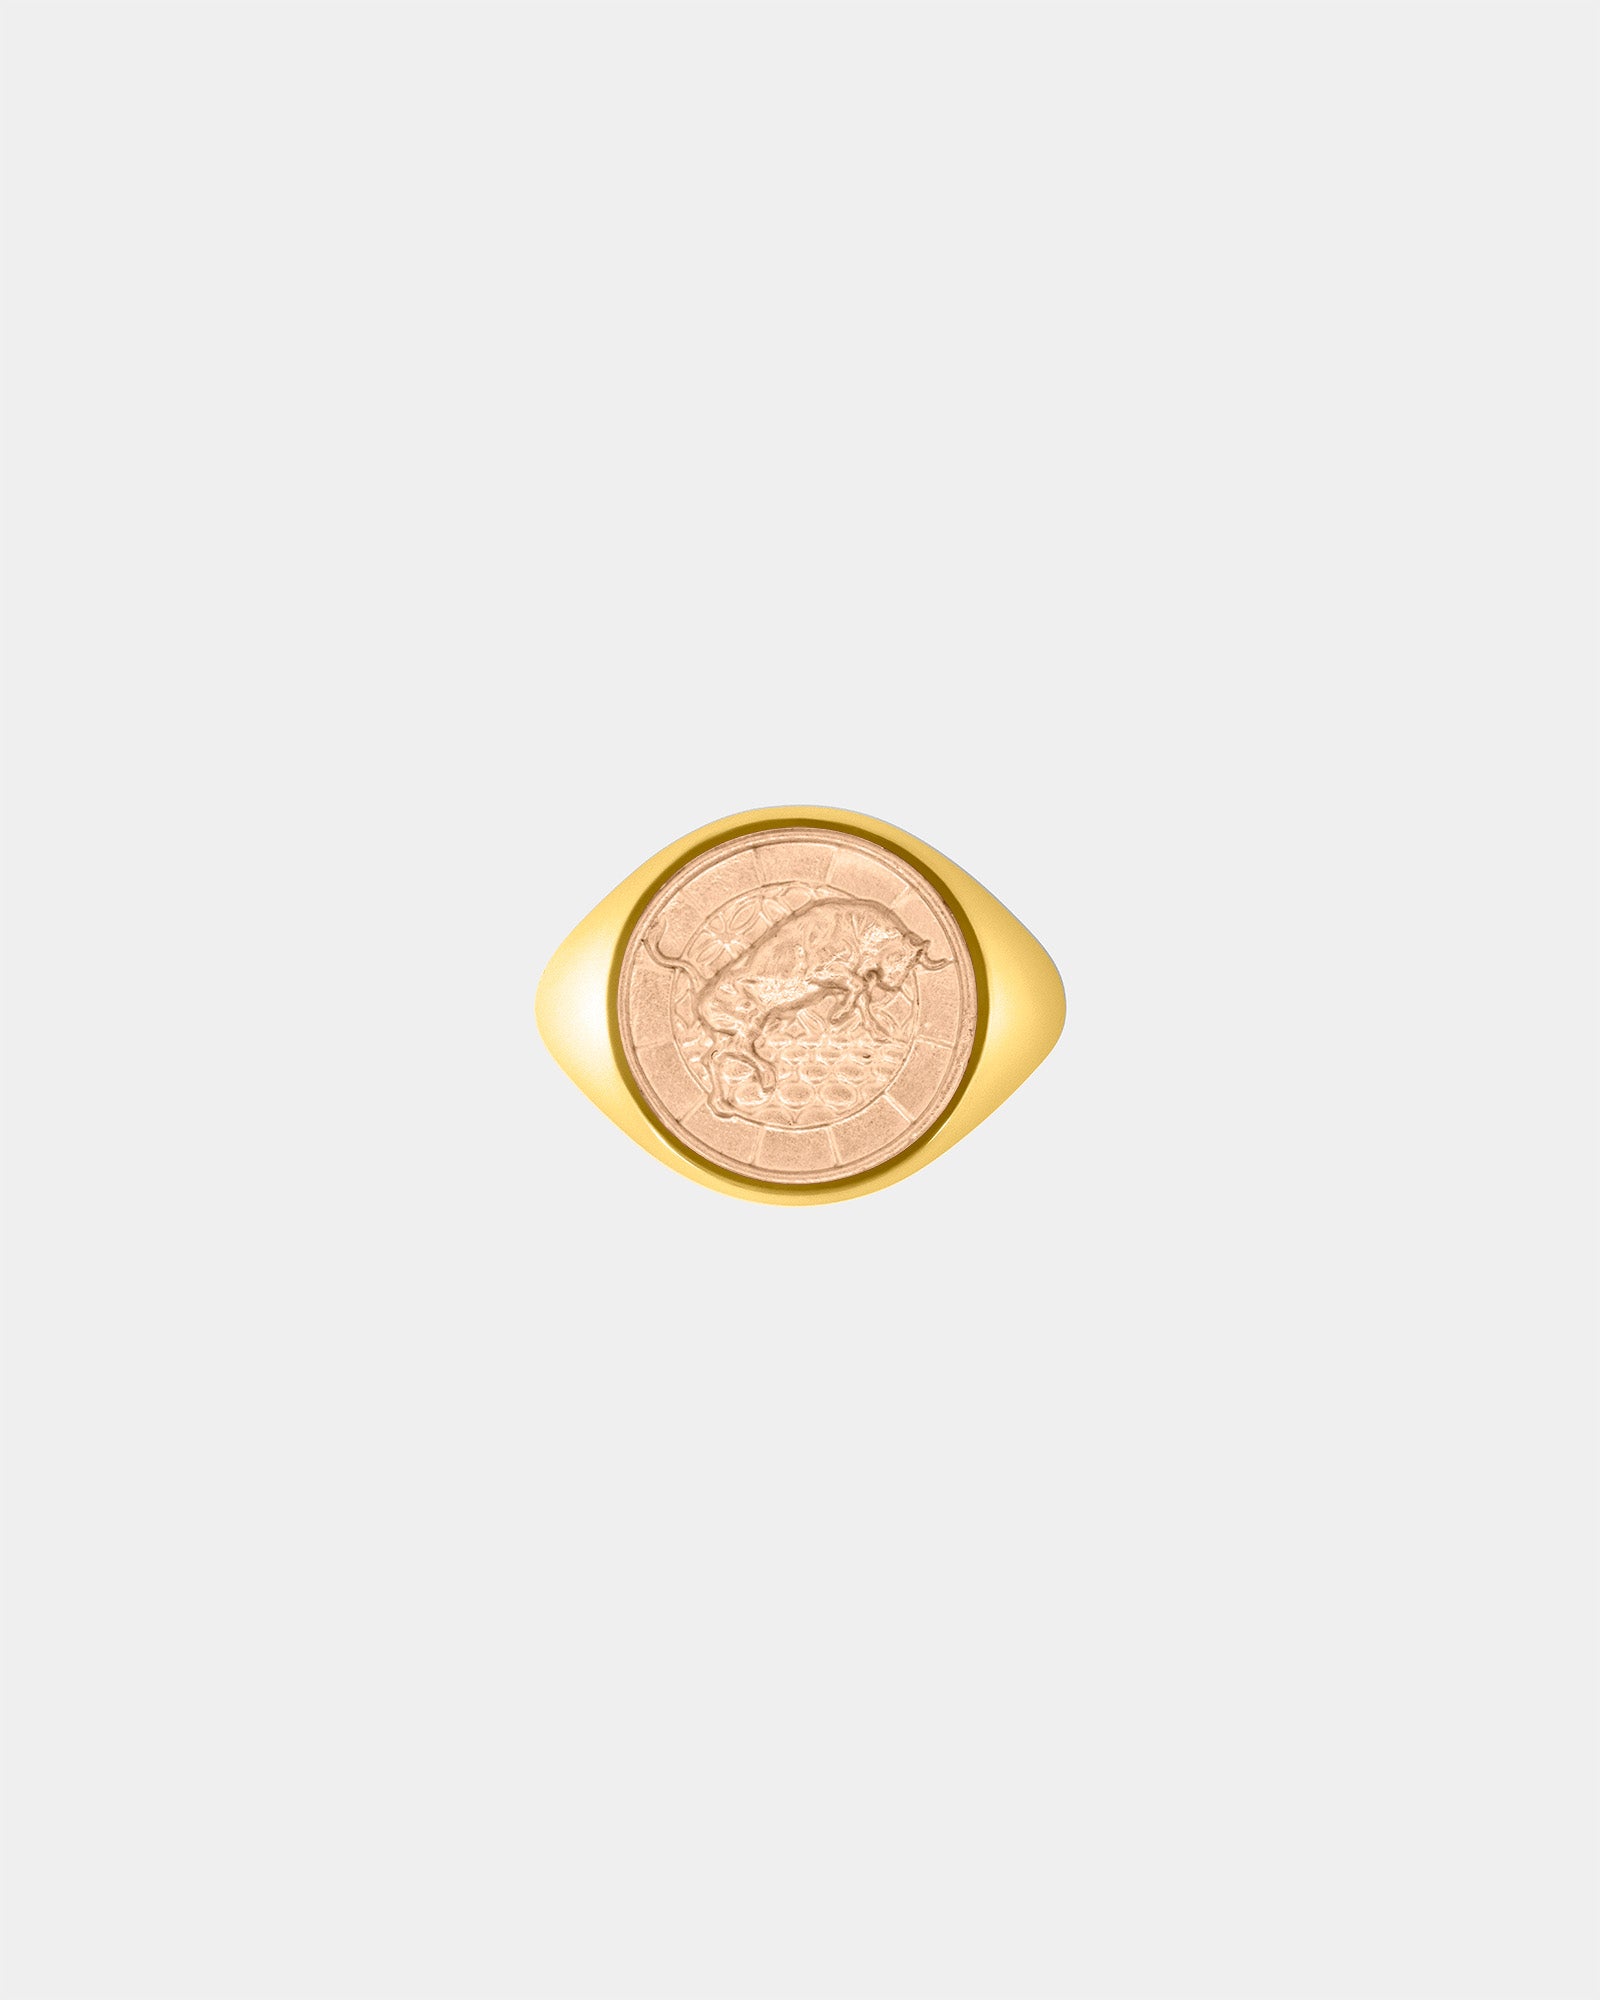 The Bull Large Signet Ring in 9k Yellow Gold / 9k Rose Gold by Wilson Grant